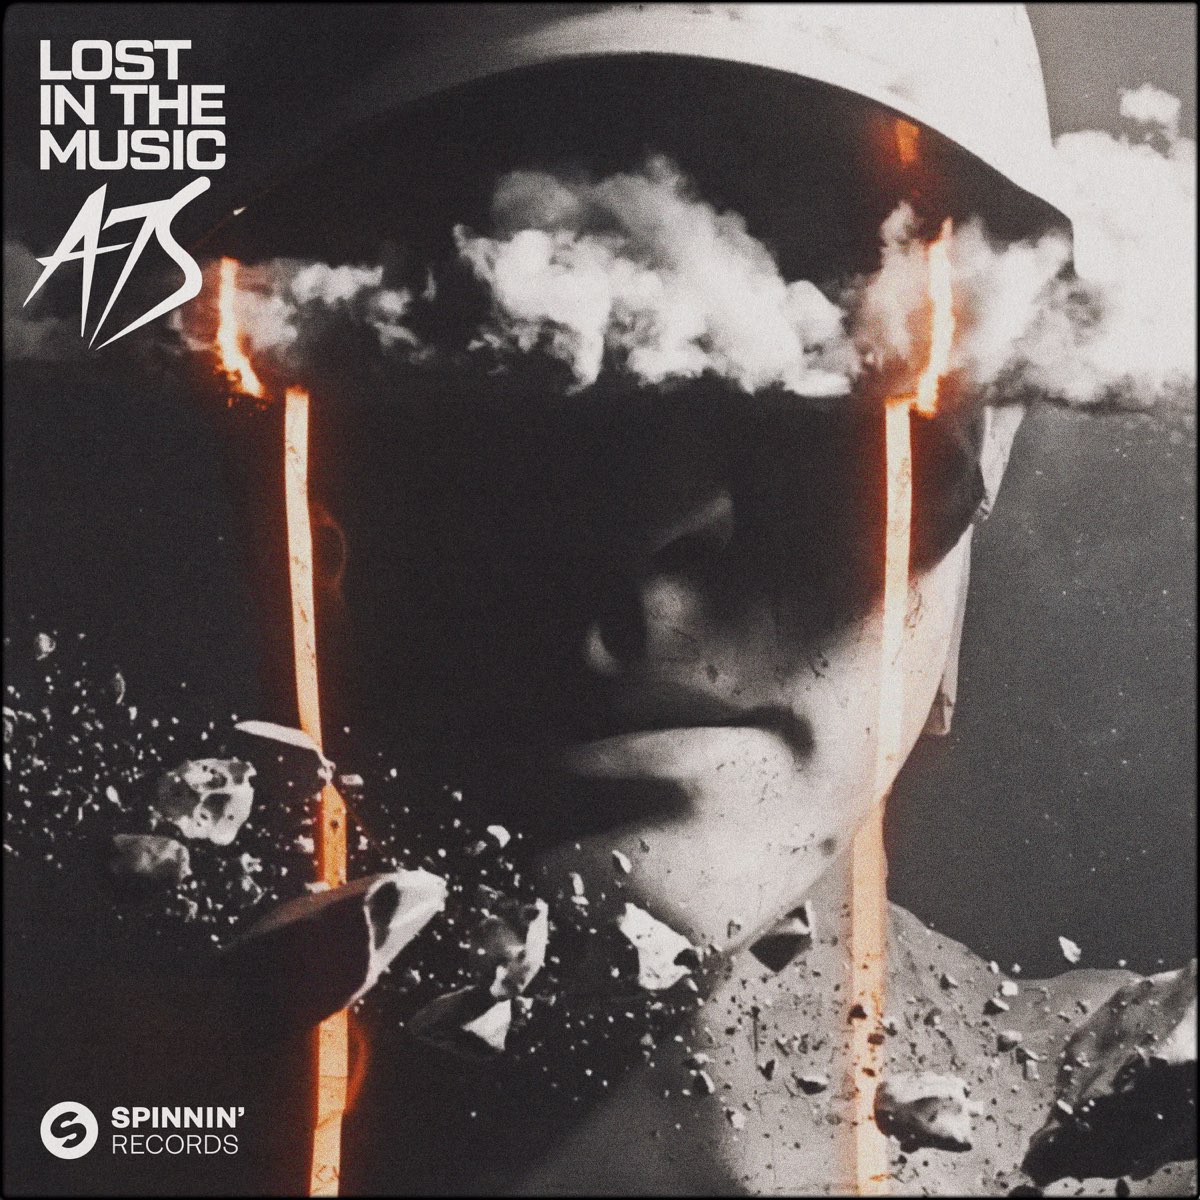 A7S — Lost In The Music cover artwork